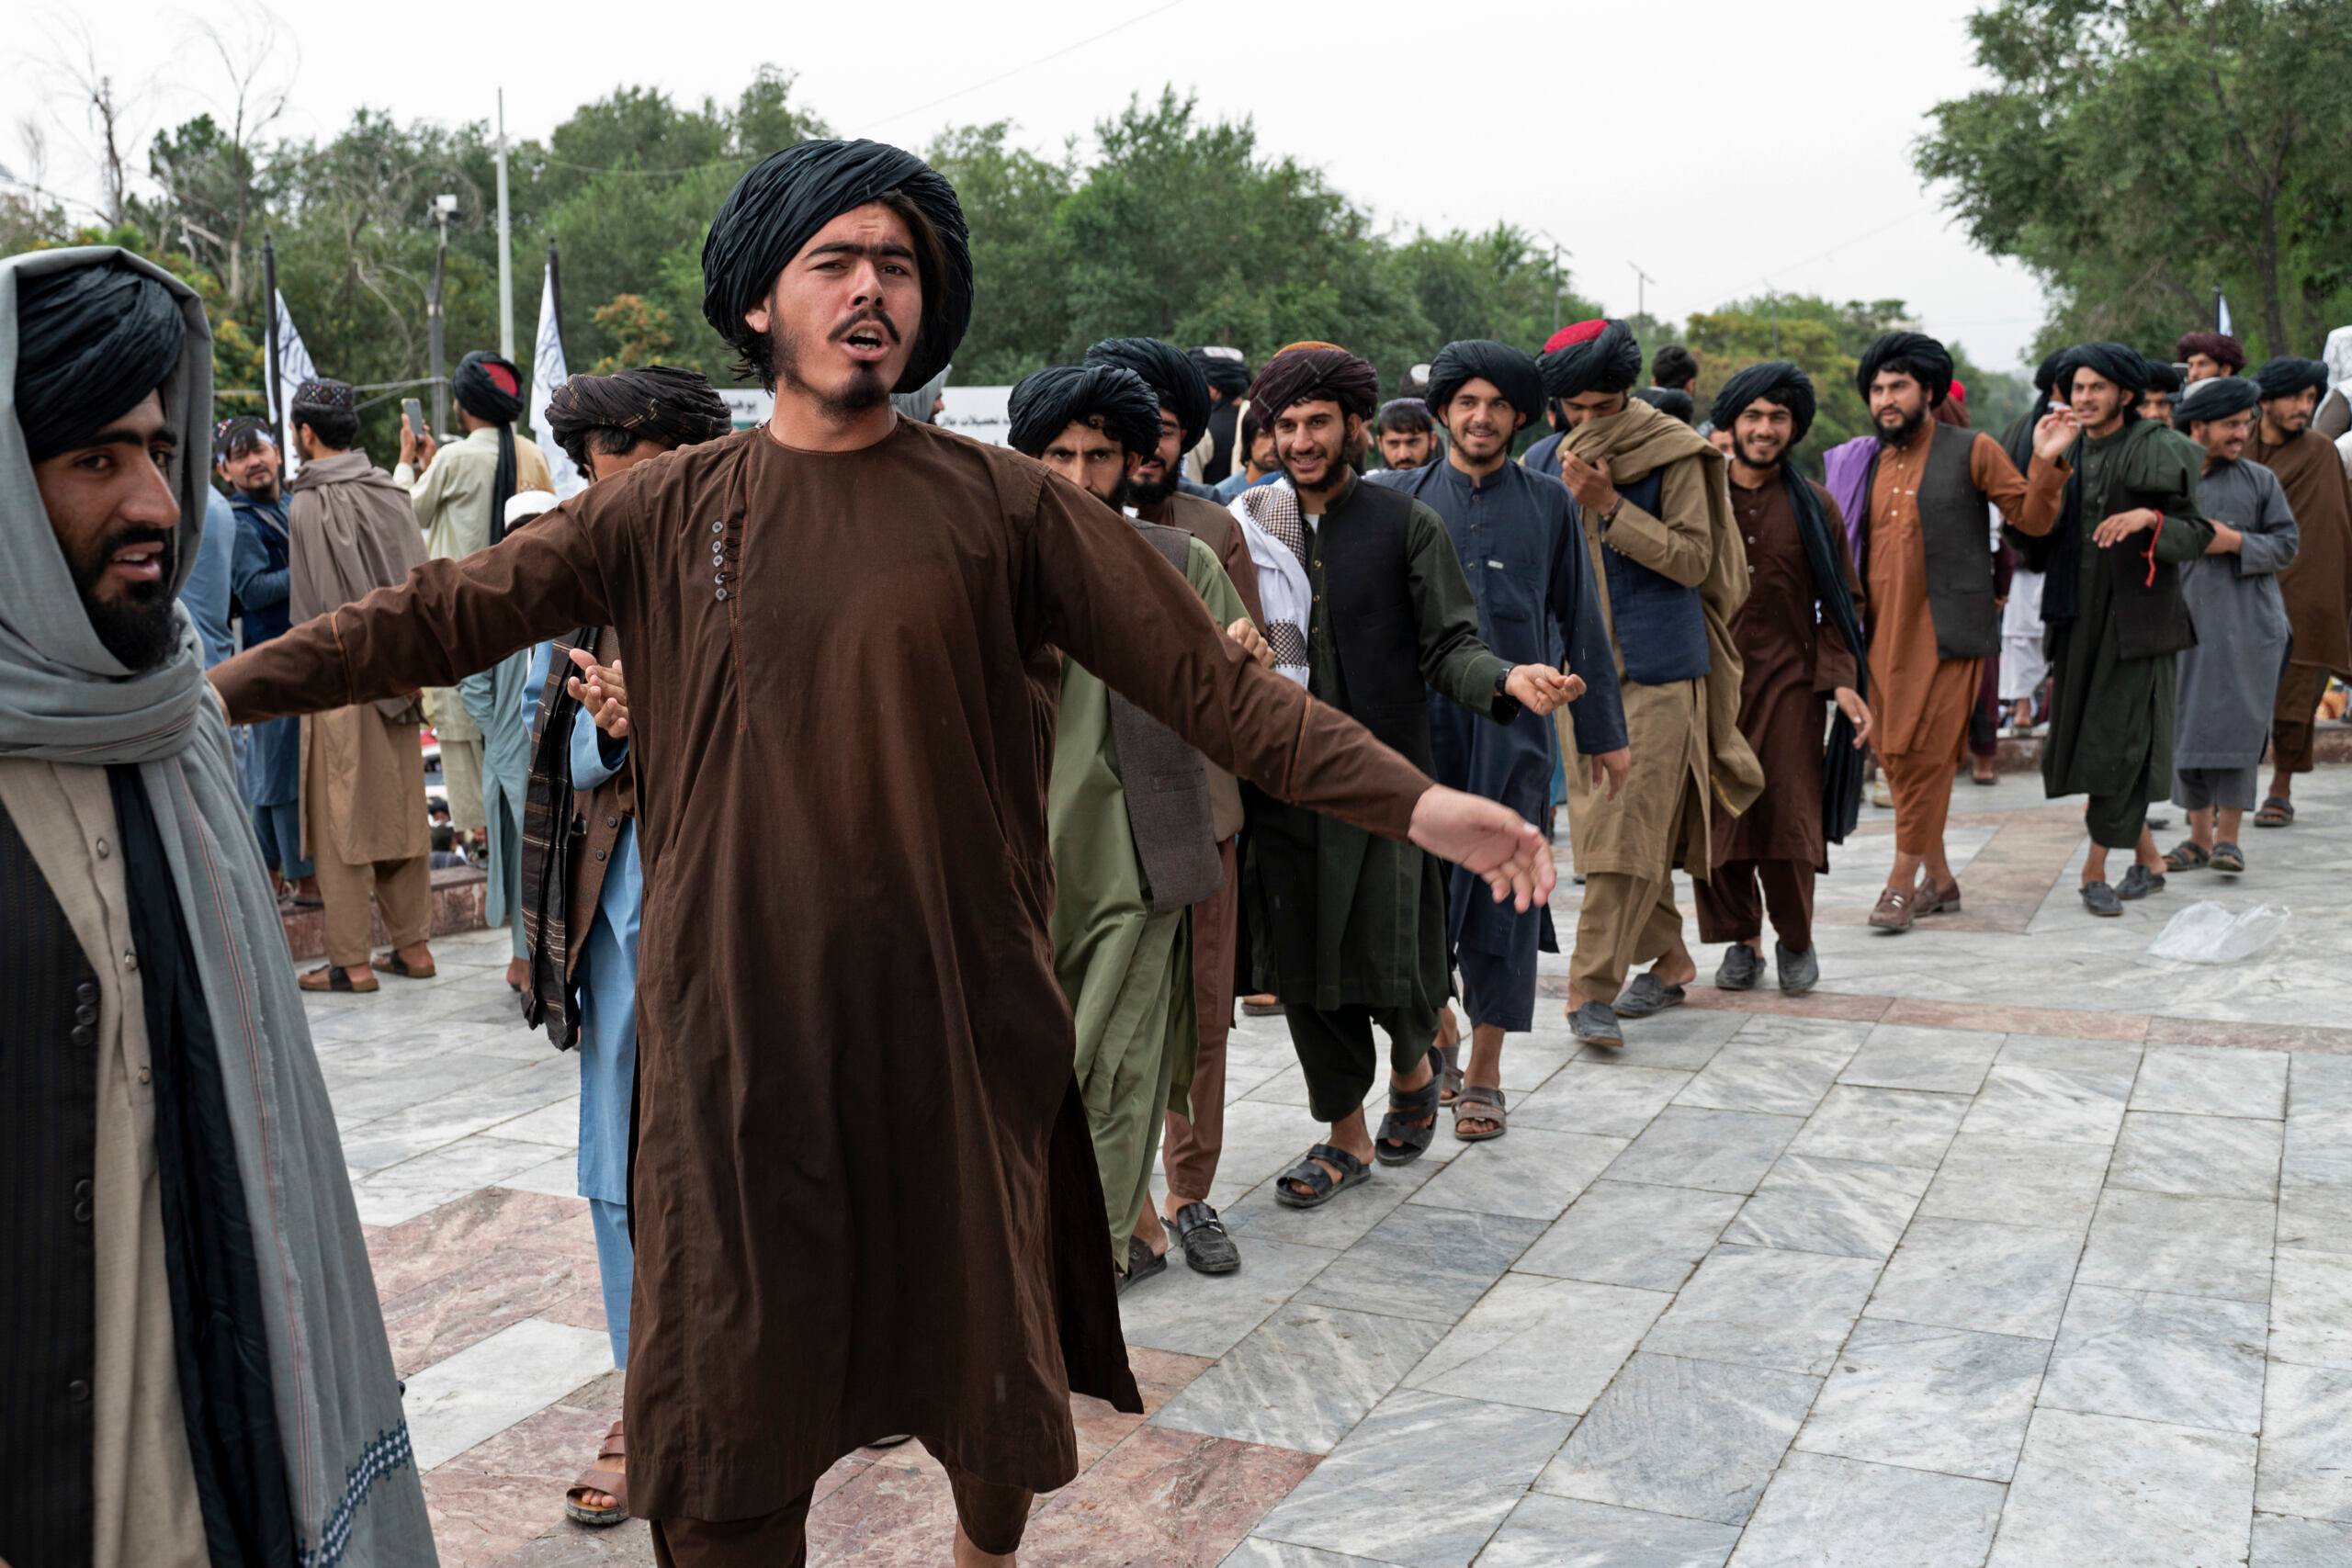 Taliban fighters dance as they celebrate their victory at the Ahmad Shah Massoud Square in Kabul on August 15, 2022. - Taliban fighters chanted victory slogans next to the US embassy in Kabul on August 15 as they marked the first anniversary of their return to power in Afghanistan following a turbulent year that saw women's rights crushed and a humanitarian crisis worsen. (Photo by Wakil KOHSAR / AFP)